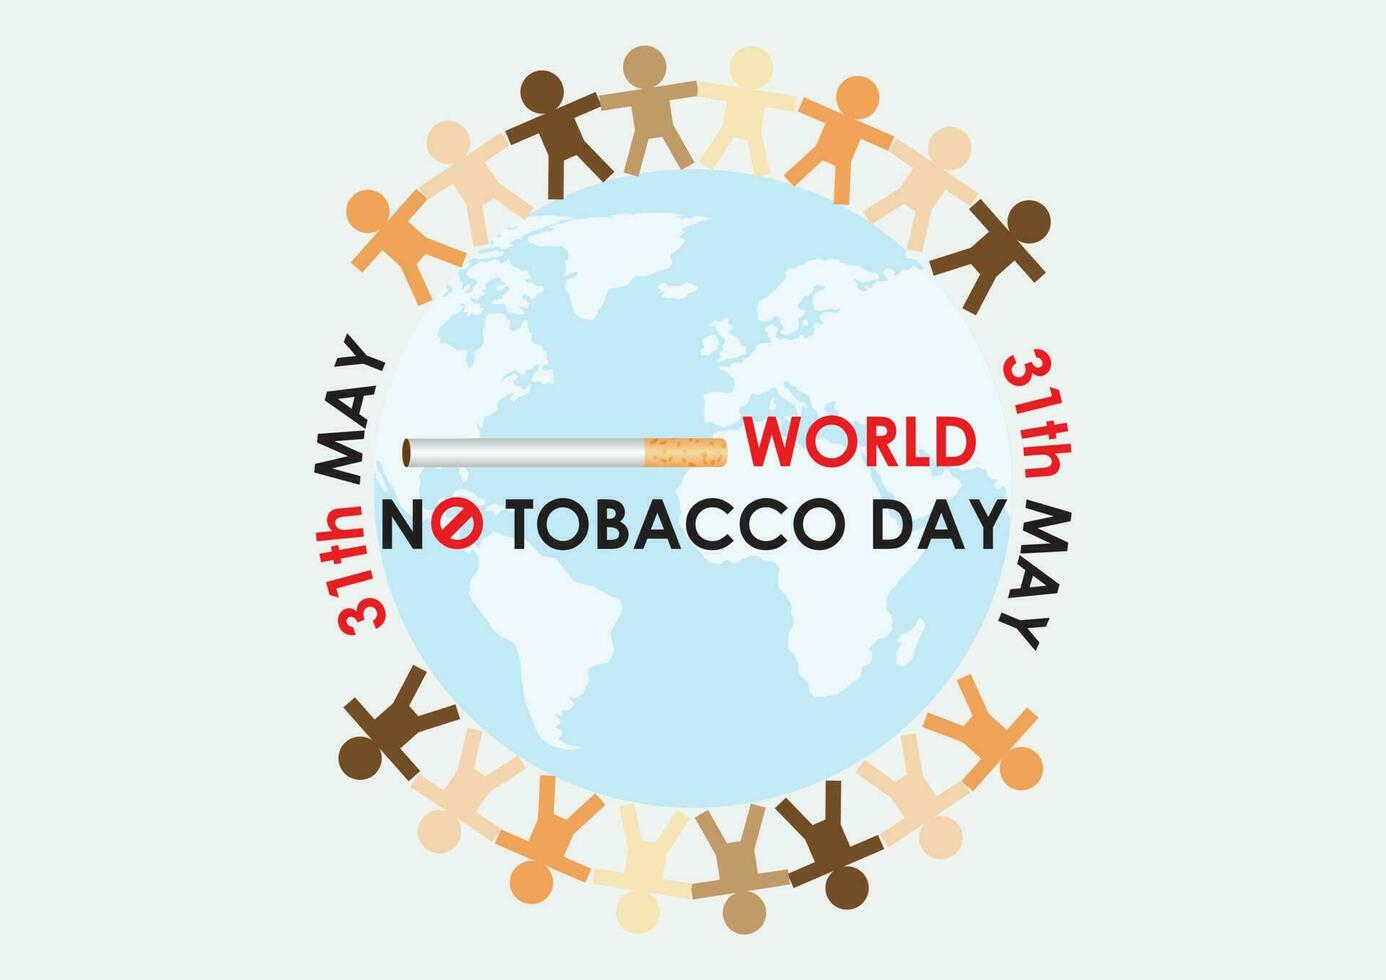 Image of cigarette and WORLD NO TOBACCO letters on earth with the day of event and colorful people in paper cut holding hands together in no tobacco campaign standing around. All in vector design.